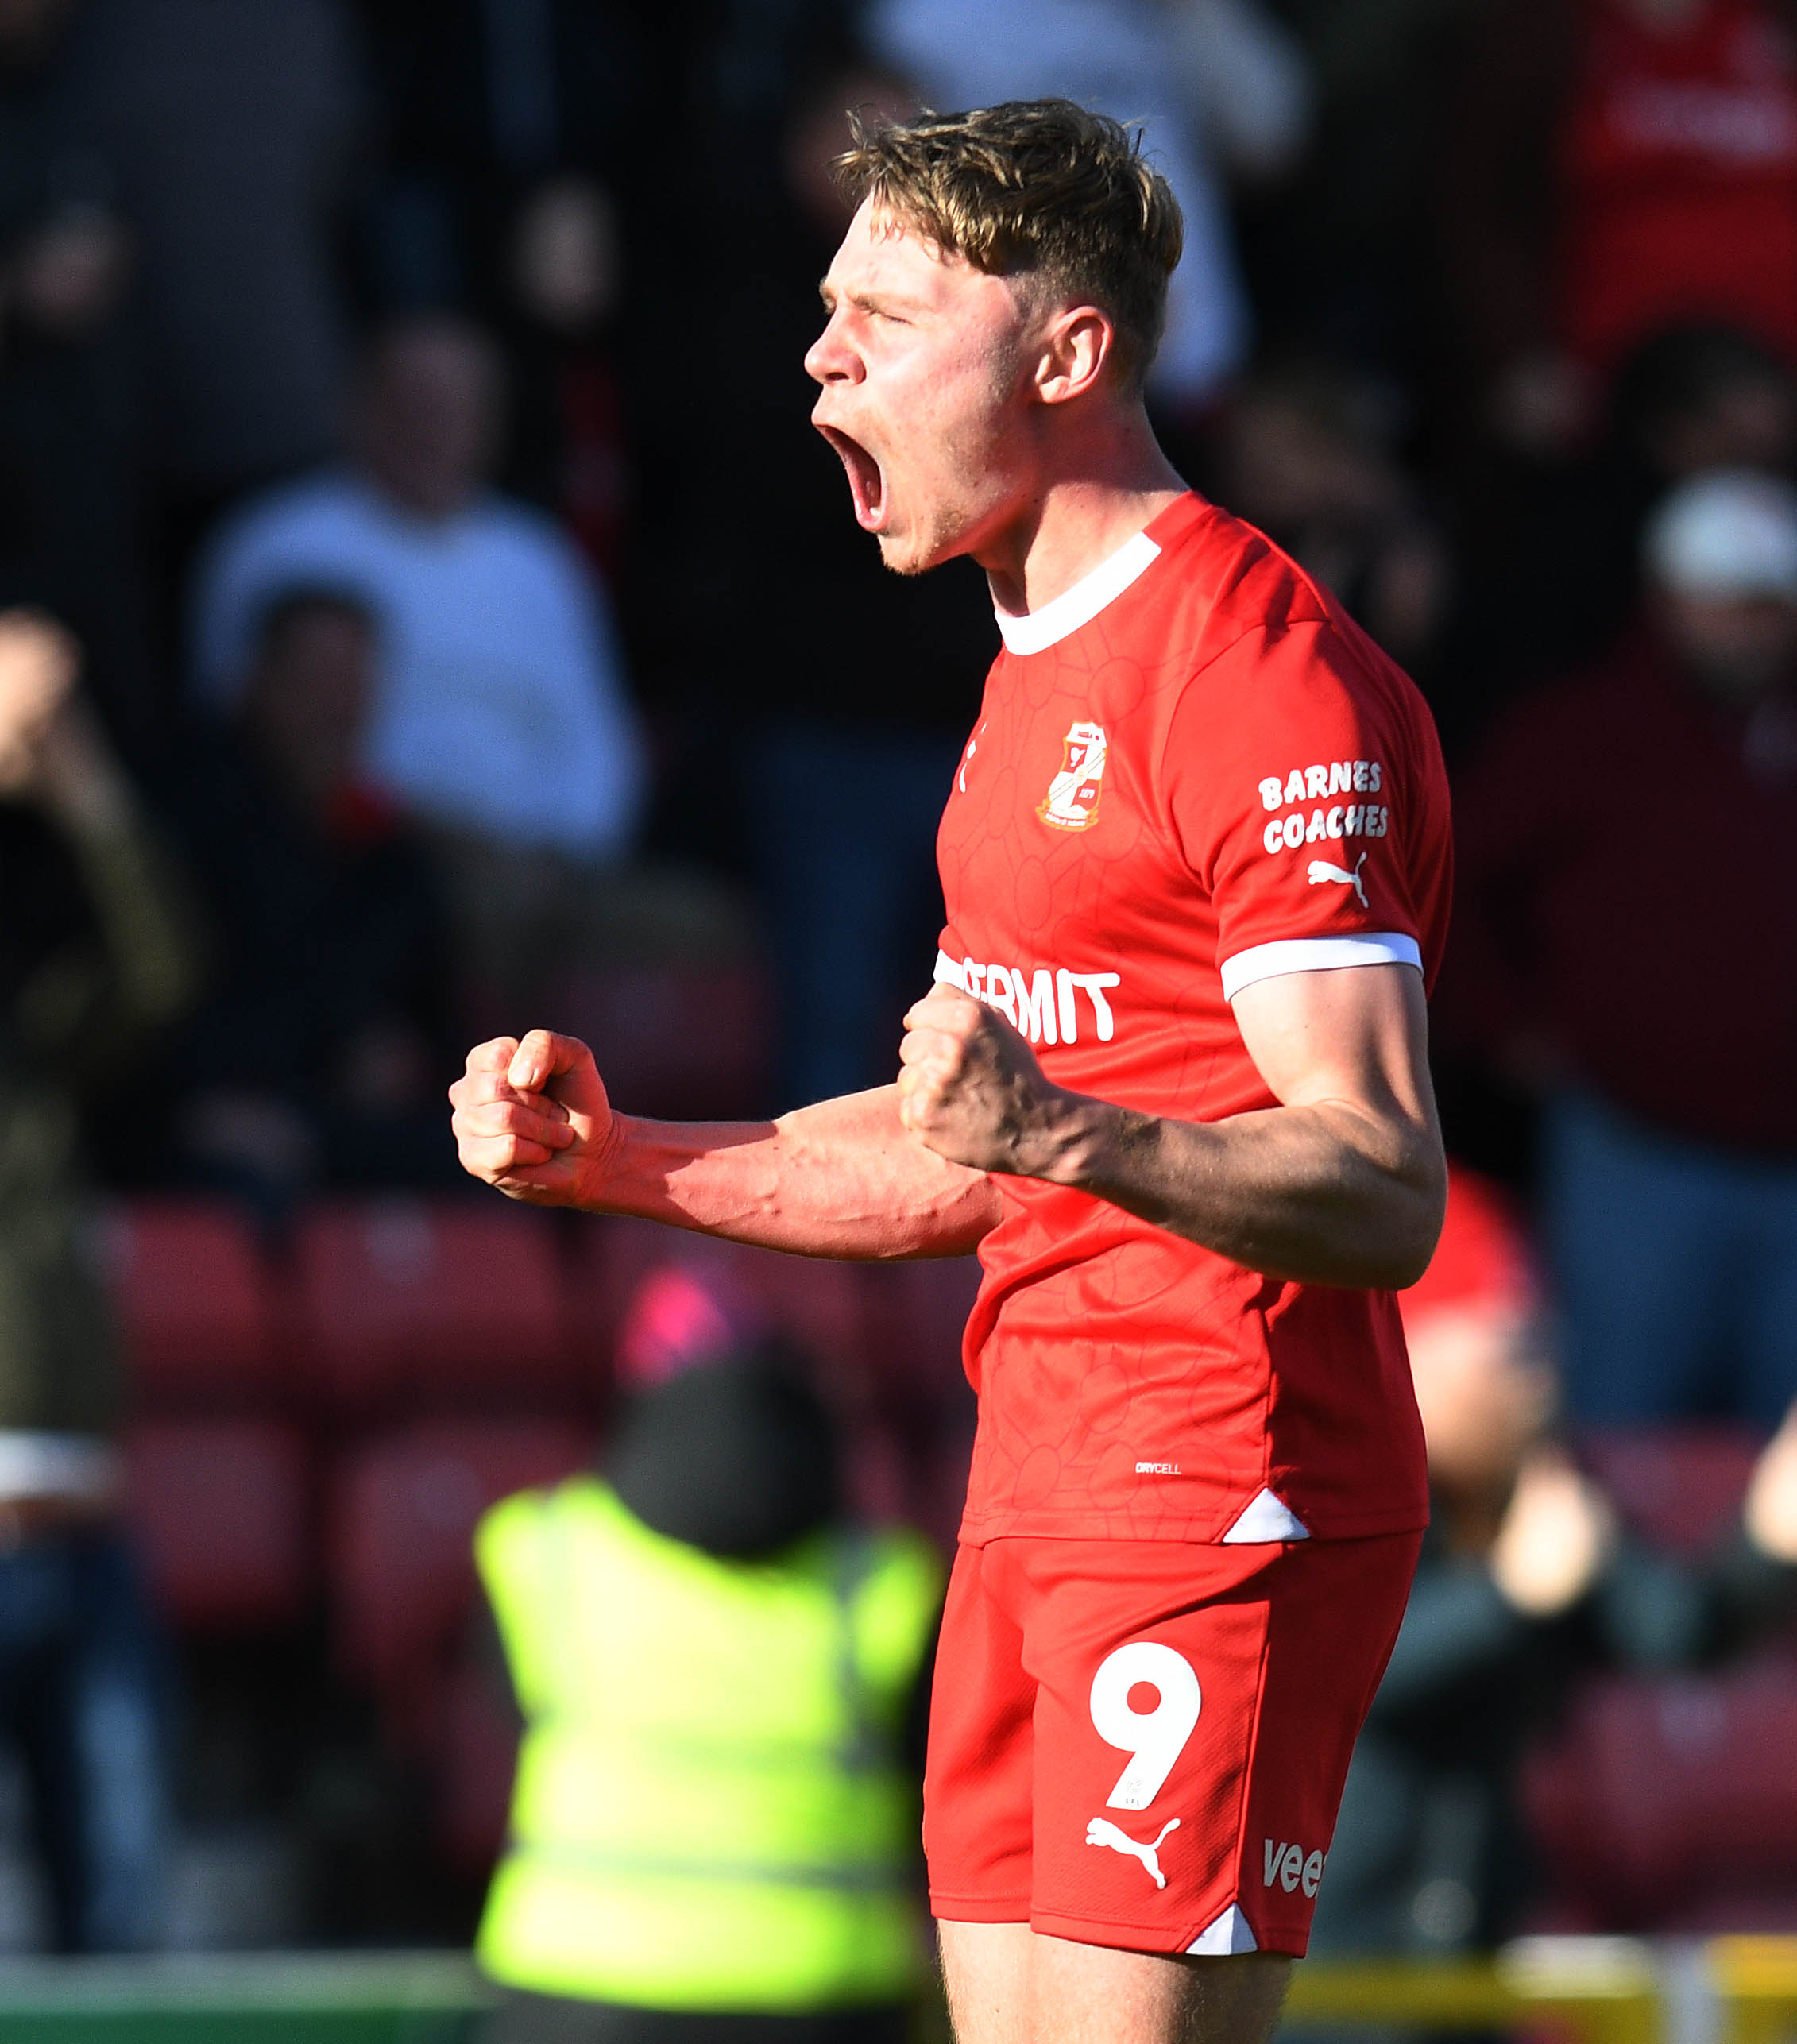 'They stuck by us' - Glatzel says Swindon fans deserved victory over Notts County